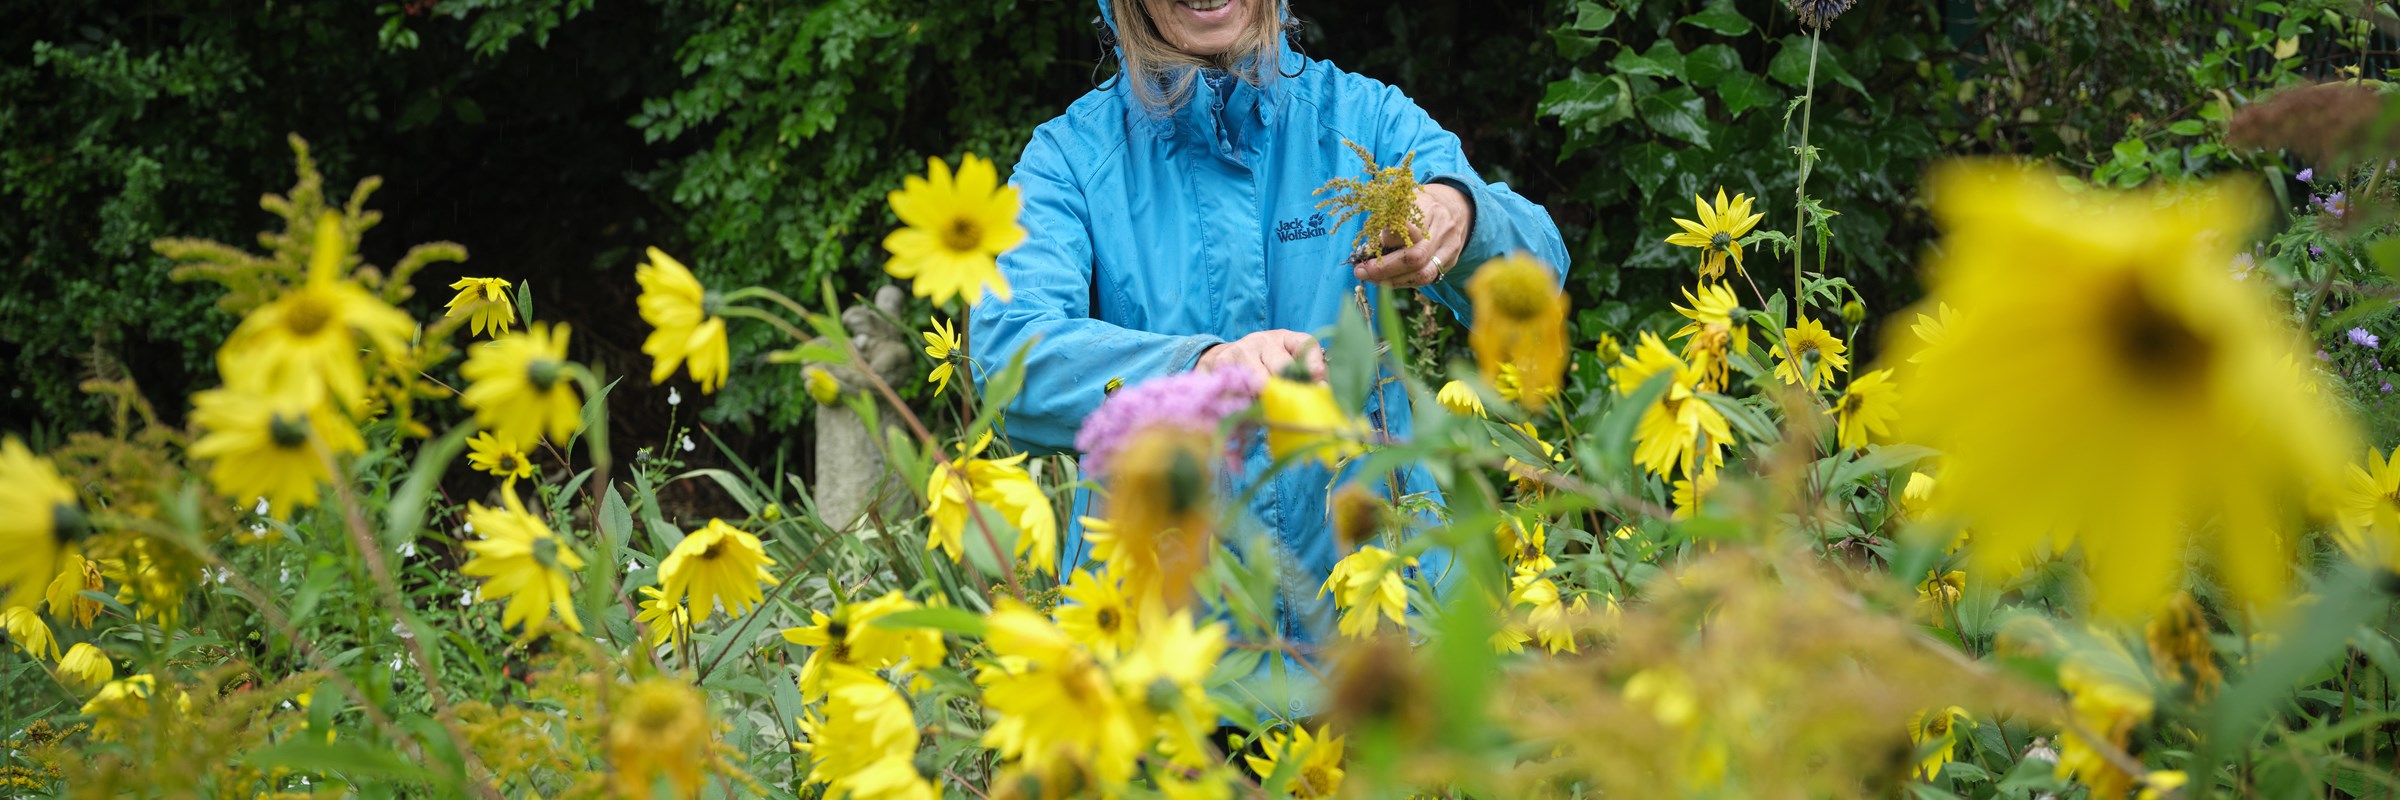 A person in a garden wearing a blue jacket.